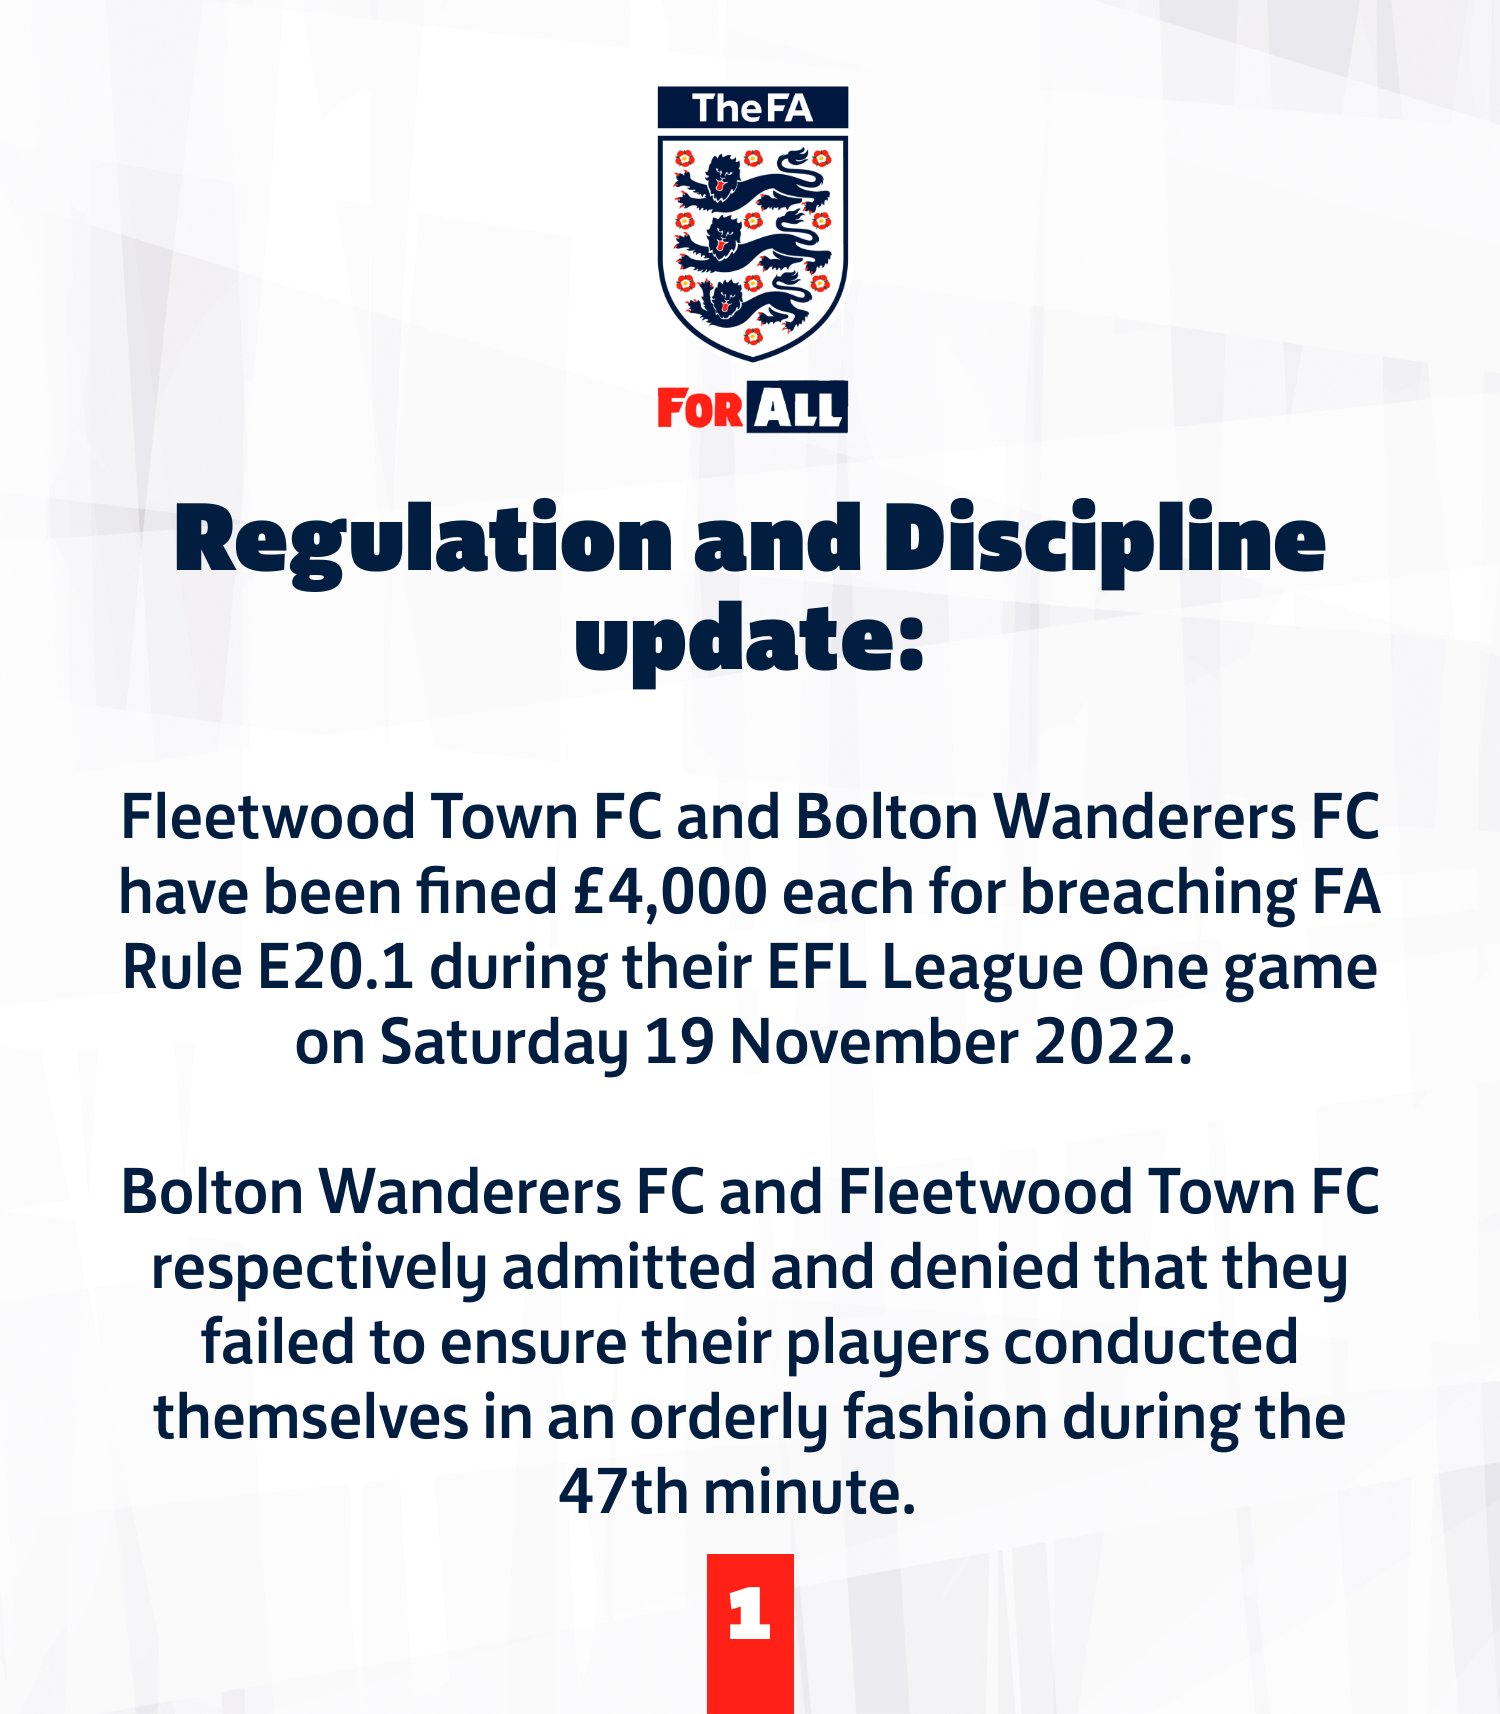 Fleetwood Town FC and Bolton Wanderers FC have been fined £4,000 each for breaching FA Rule E20.1 during their EFL League One game on Saturday 19 November 2022.    Bolton Wanderers FC and Fleetwood Town FC respectively admitted and denied that they failed to ensure their players conducted themselves in an orderly fashion during the 47th minute.